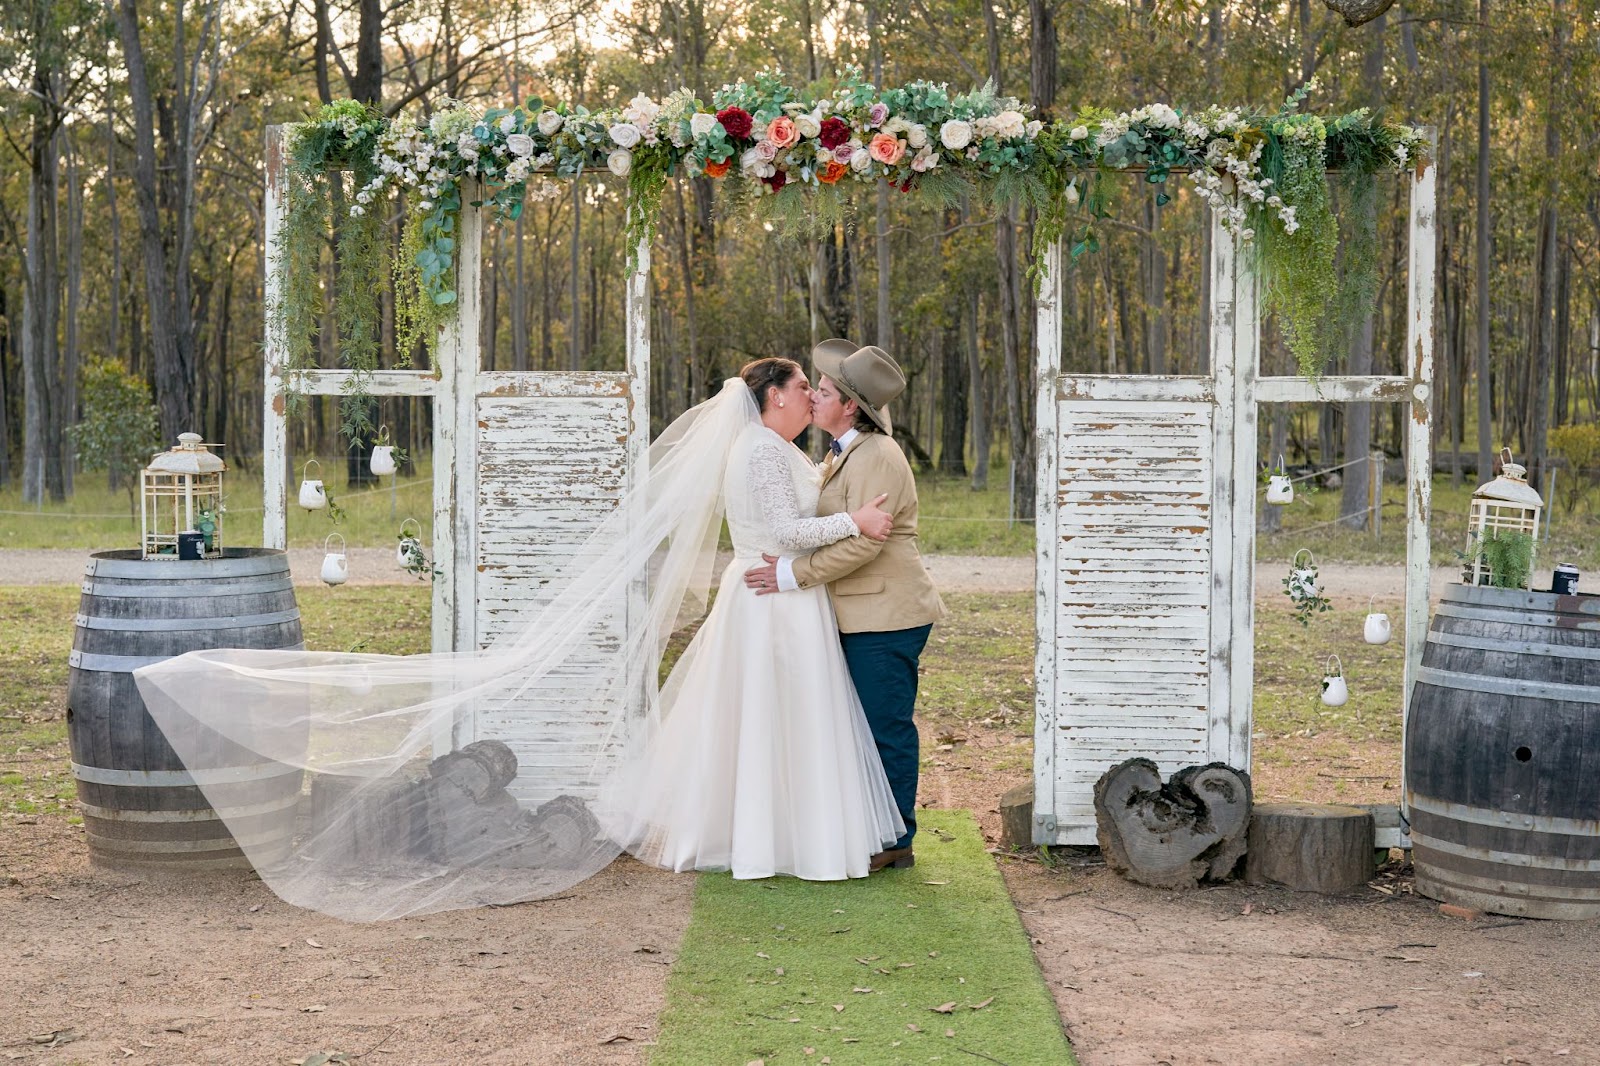 Newly-weds sharing a kiss at Kookaburra Hideaway after wedding ceremony.